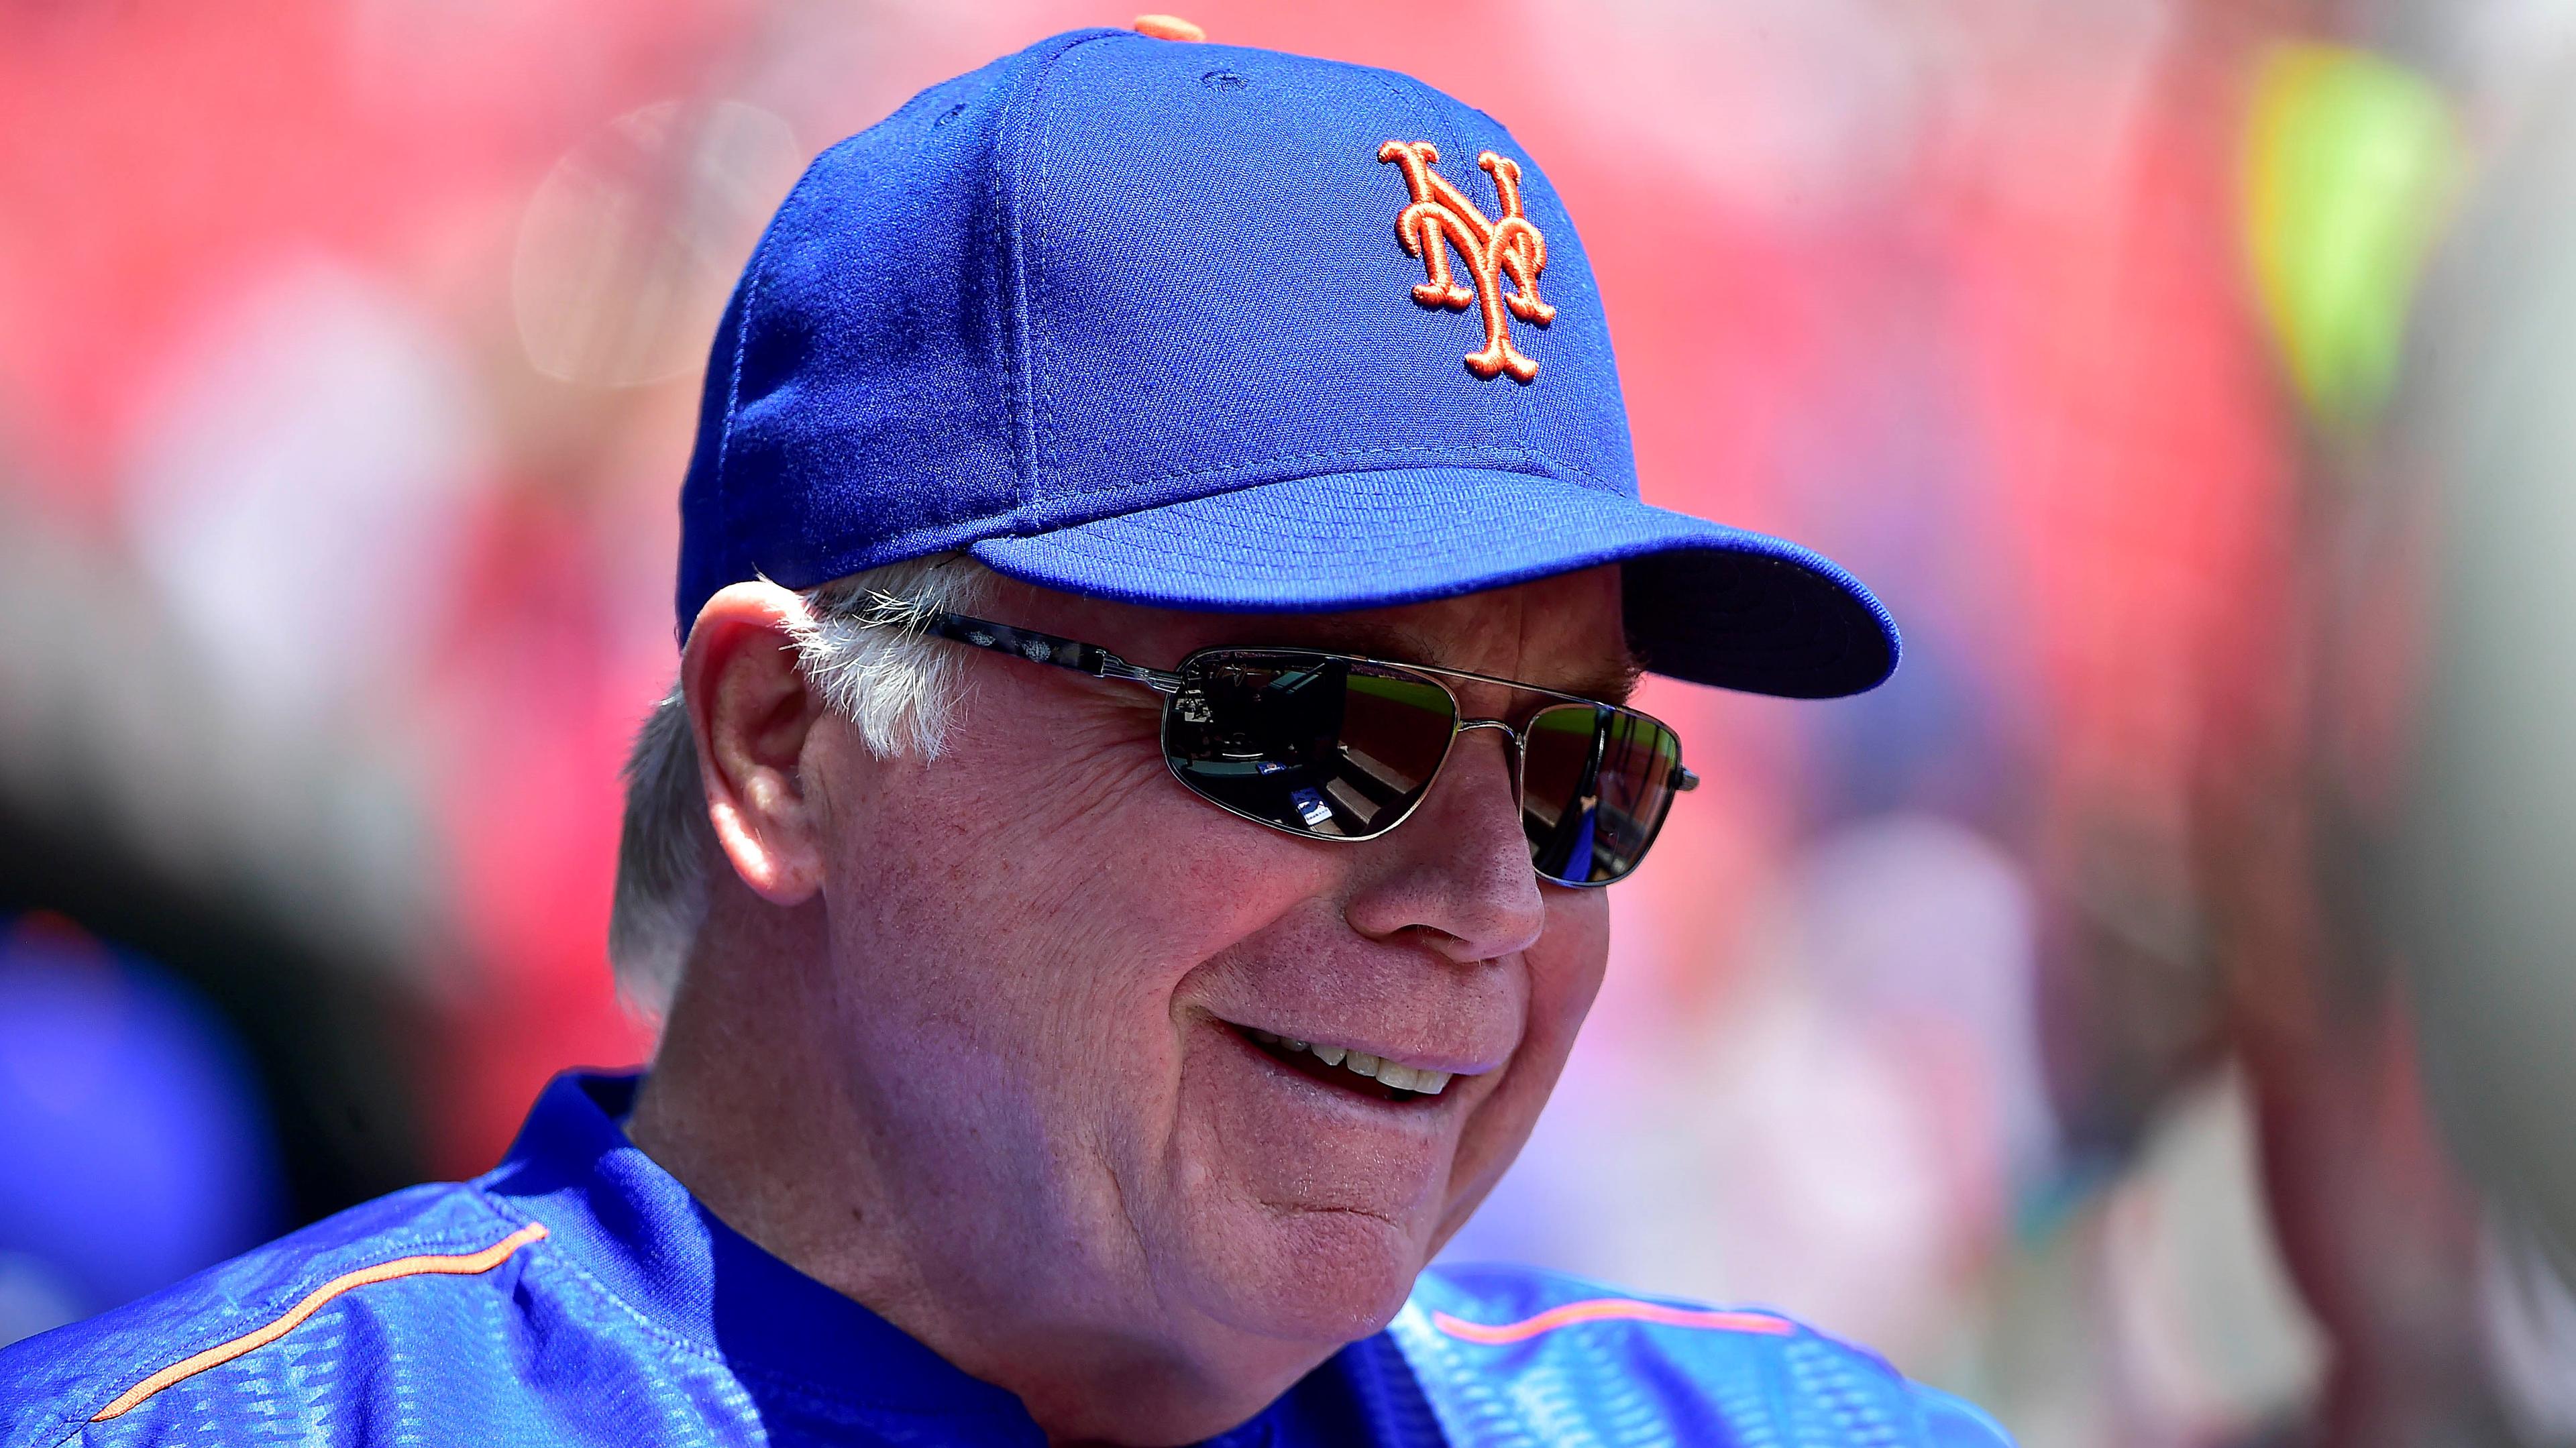 Apr 27, 2022; St. Louis, Missouri, USA; New York Mets manager Buck Showalter (11) looks on before a game against the St. Louis Cardinals at Busch Stadium. Mandatory Credit: Jeff Curry-USA TODAY Sports / Jeff Curry-USA TODAY Sports